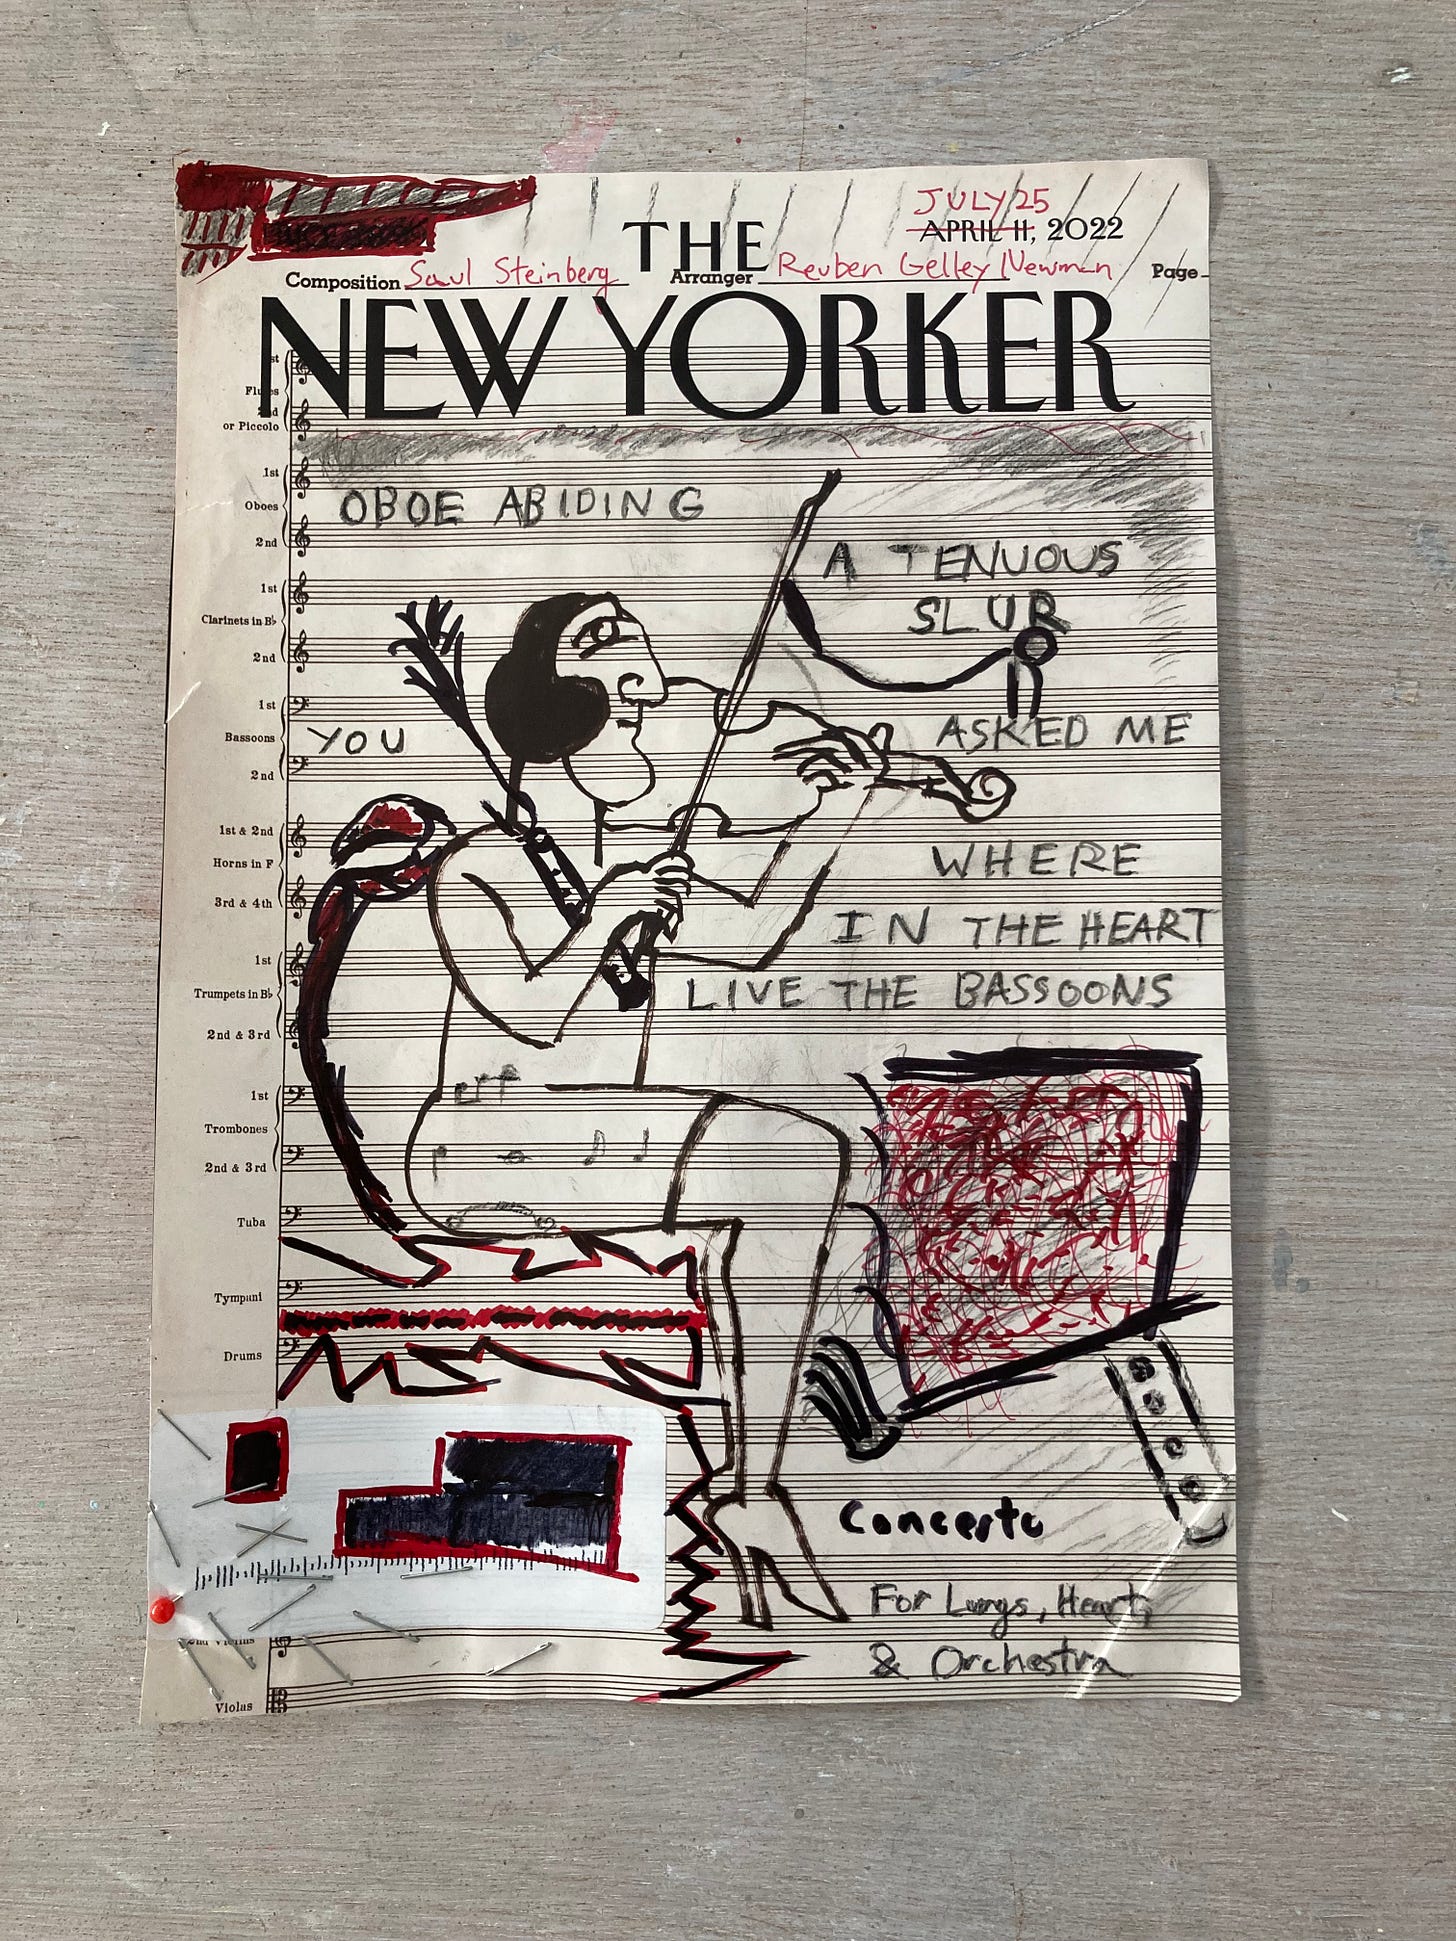 A collage on a New Yorker Saul Steinberg cover from April 11, 2022, which has a figure playing violin with the backdrop of a blank orchestral score. I’ve added ink drawings in red and black, sewing pins, and the text below.